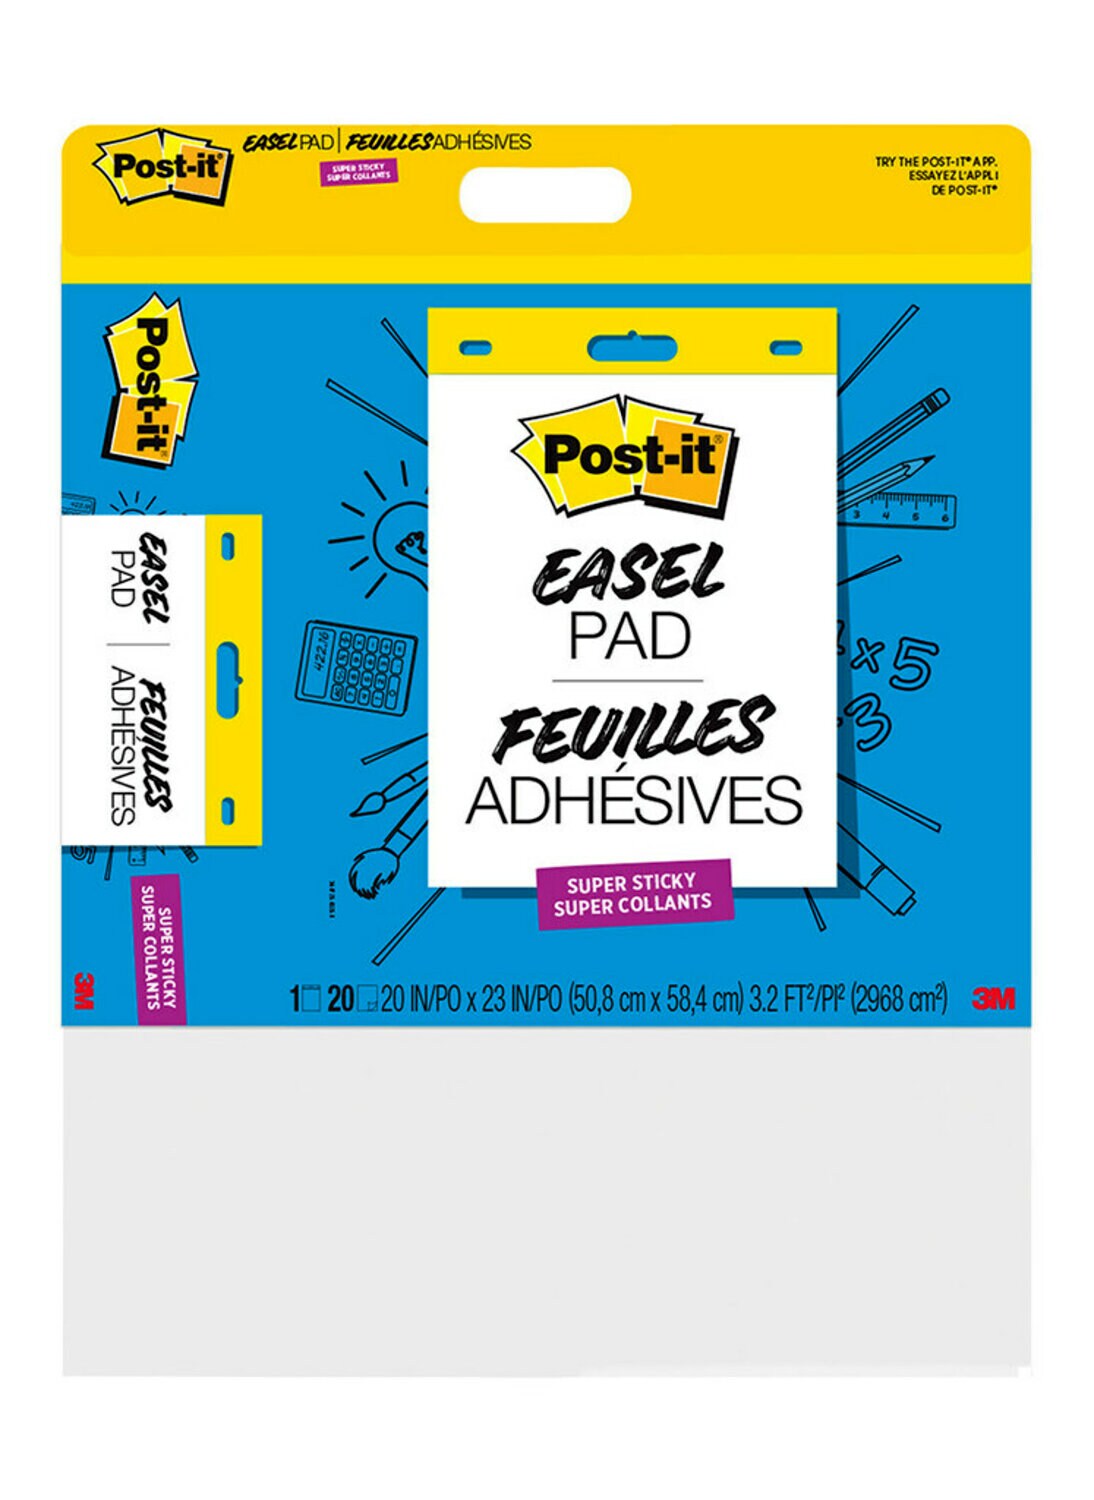 7100226816 - Post-it Super Sticky Easel Pad 566BSS, 20 in x 23 in (50.8 cm x 58.4 cm), 20 Sheets/Pad, 1 Pad